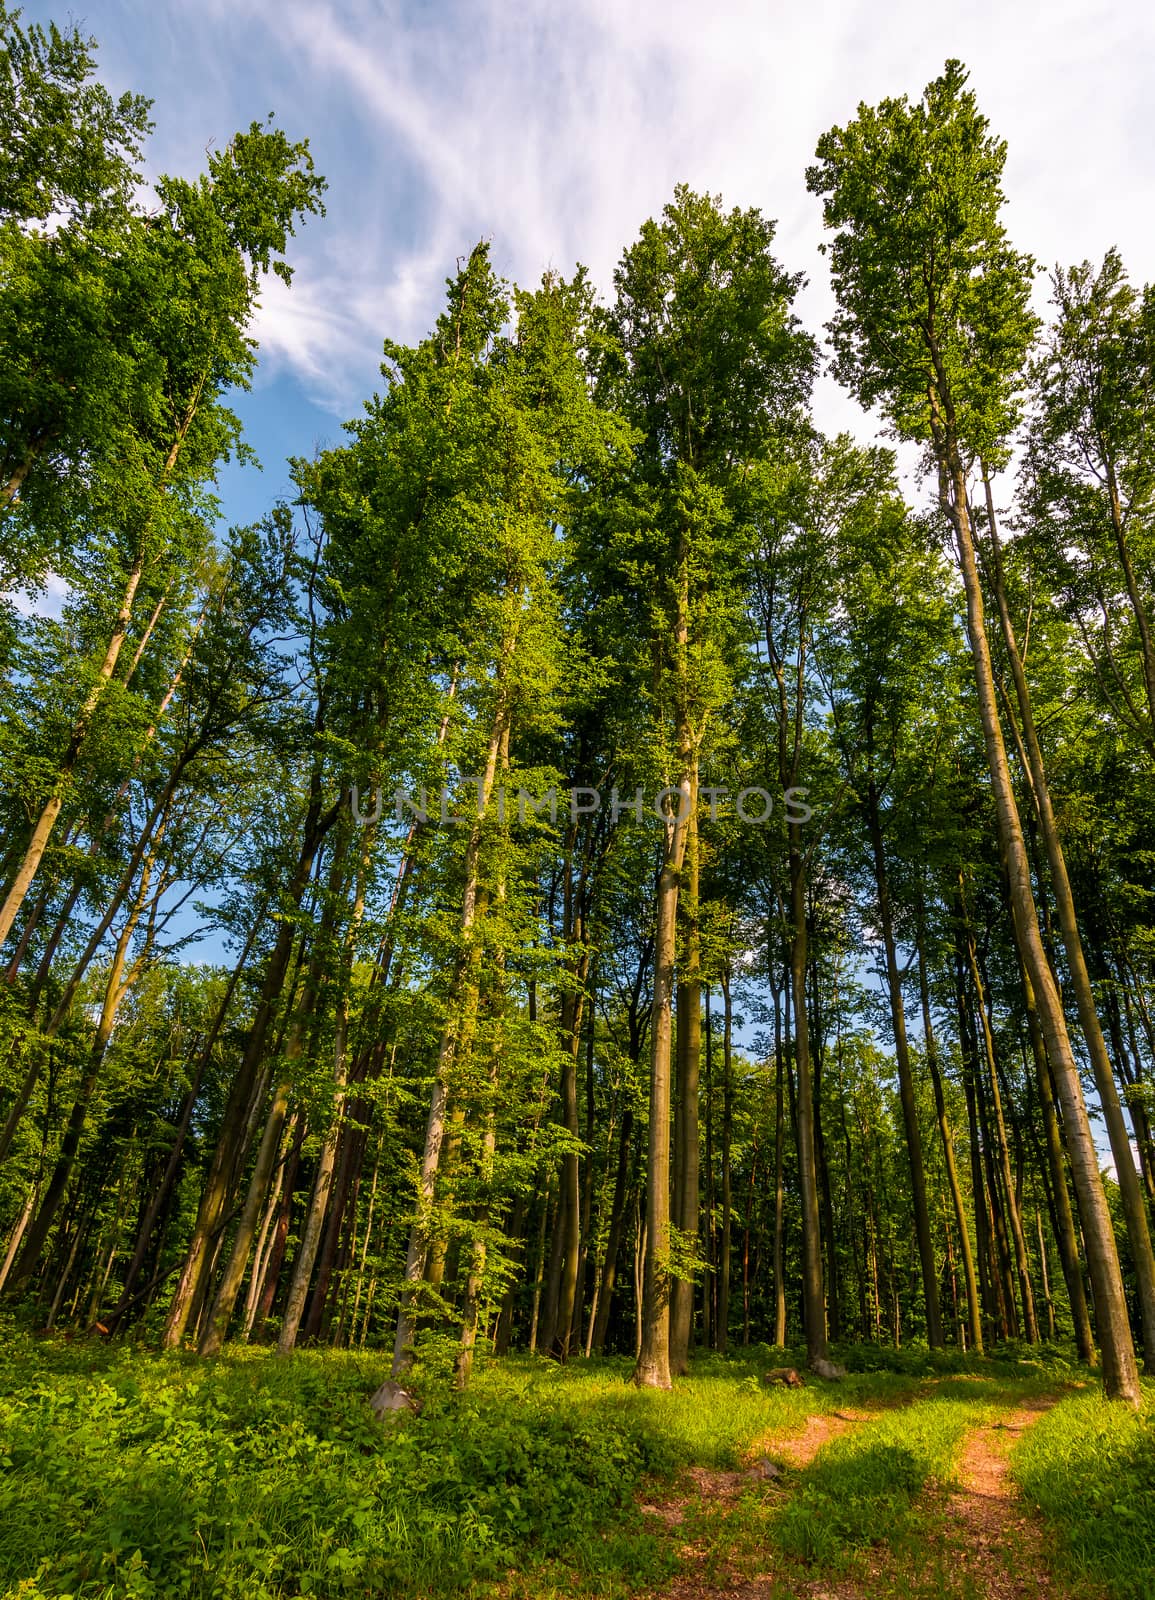 forest road among tall trees with green foliage by Pellinni